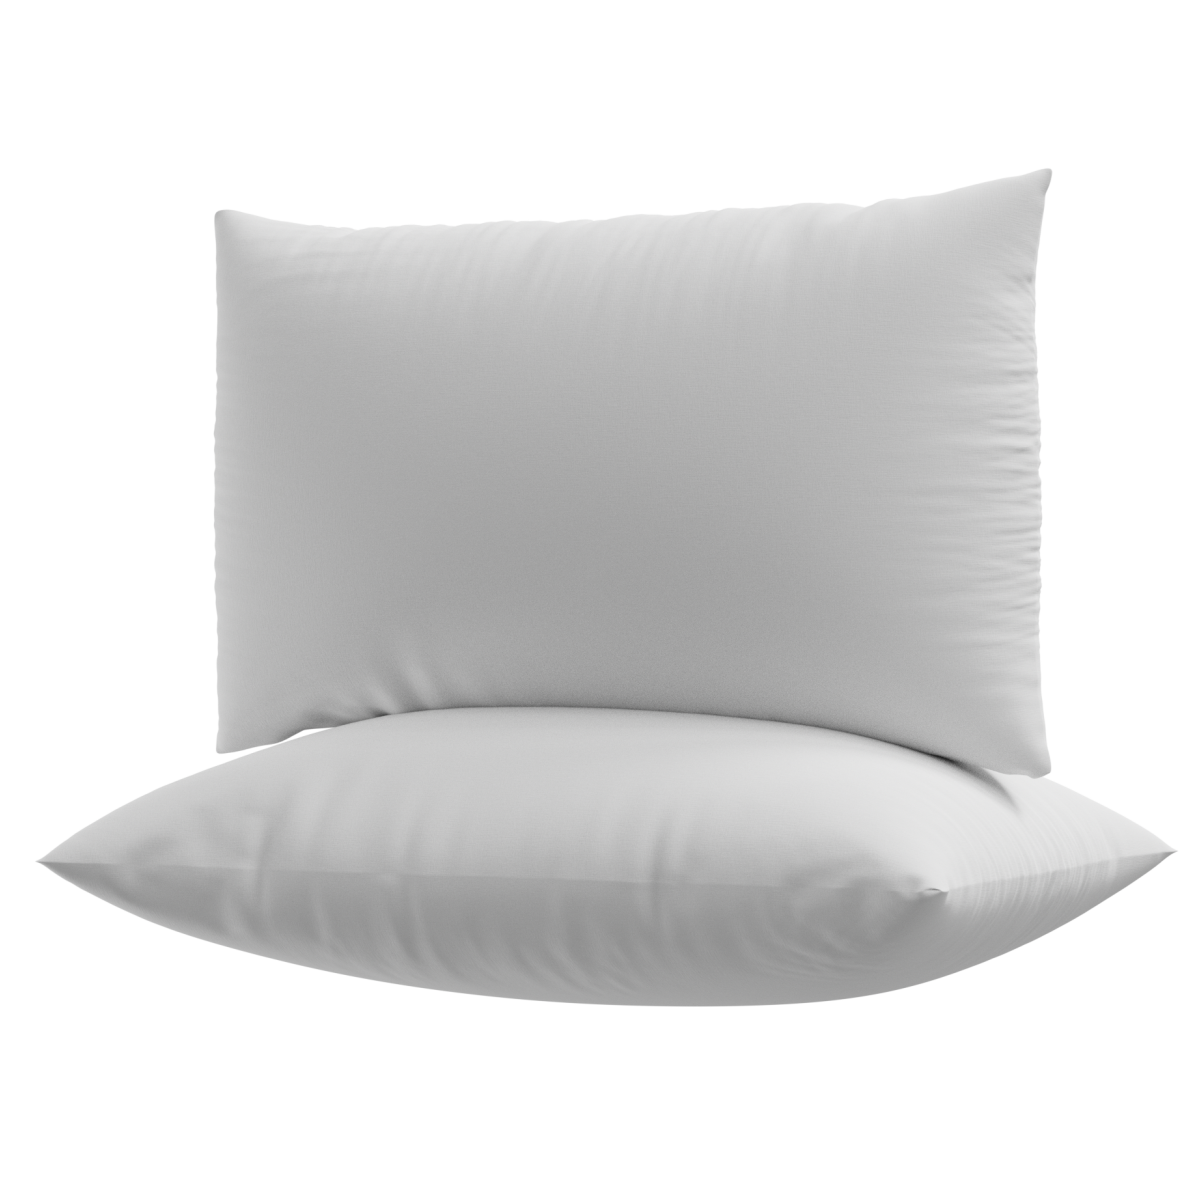 Utopia Bedding Throw Pillow Insert 14 x 14 Inches (White), Set of 2  Gusseted Decorative Bed and Couch Pillows, Cushion Sham Stuffer for Sofa